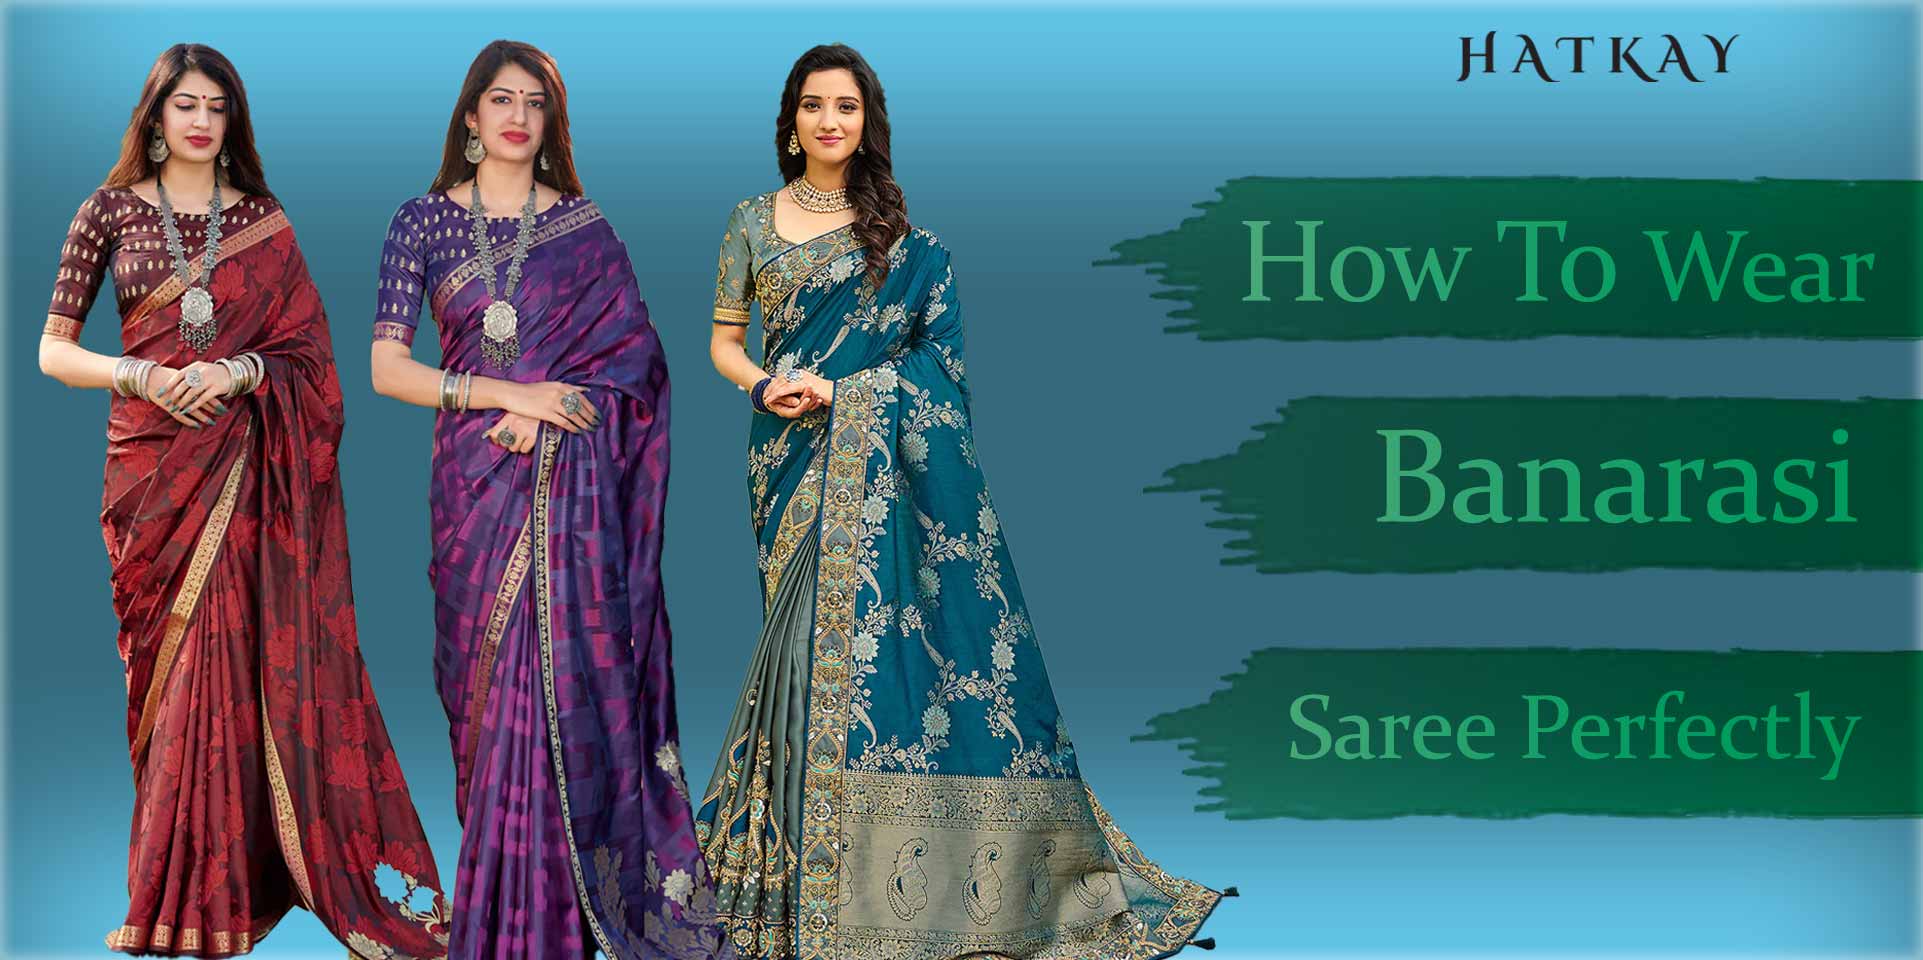 How to Wear Banarasi Saree Perfectly? What Are the Common Mistakes Women Make While Wearing a Banarasi Saree?